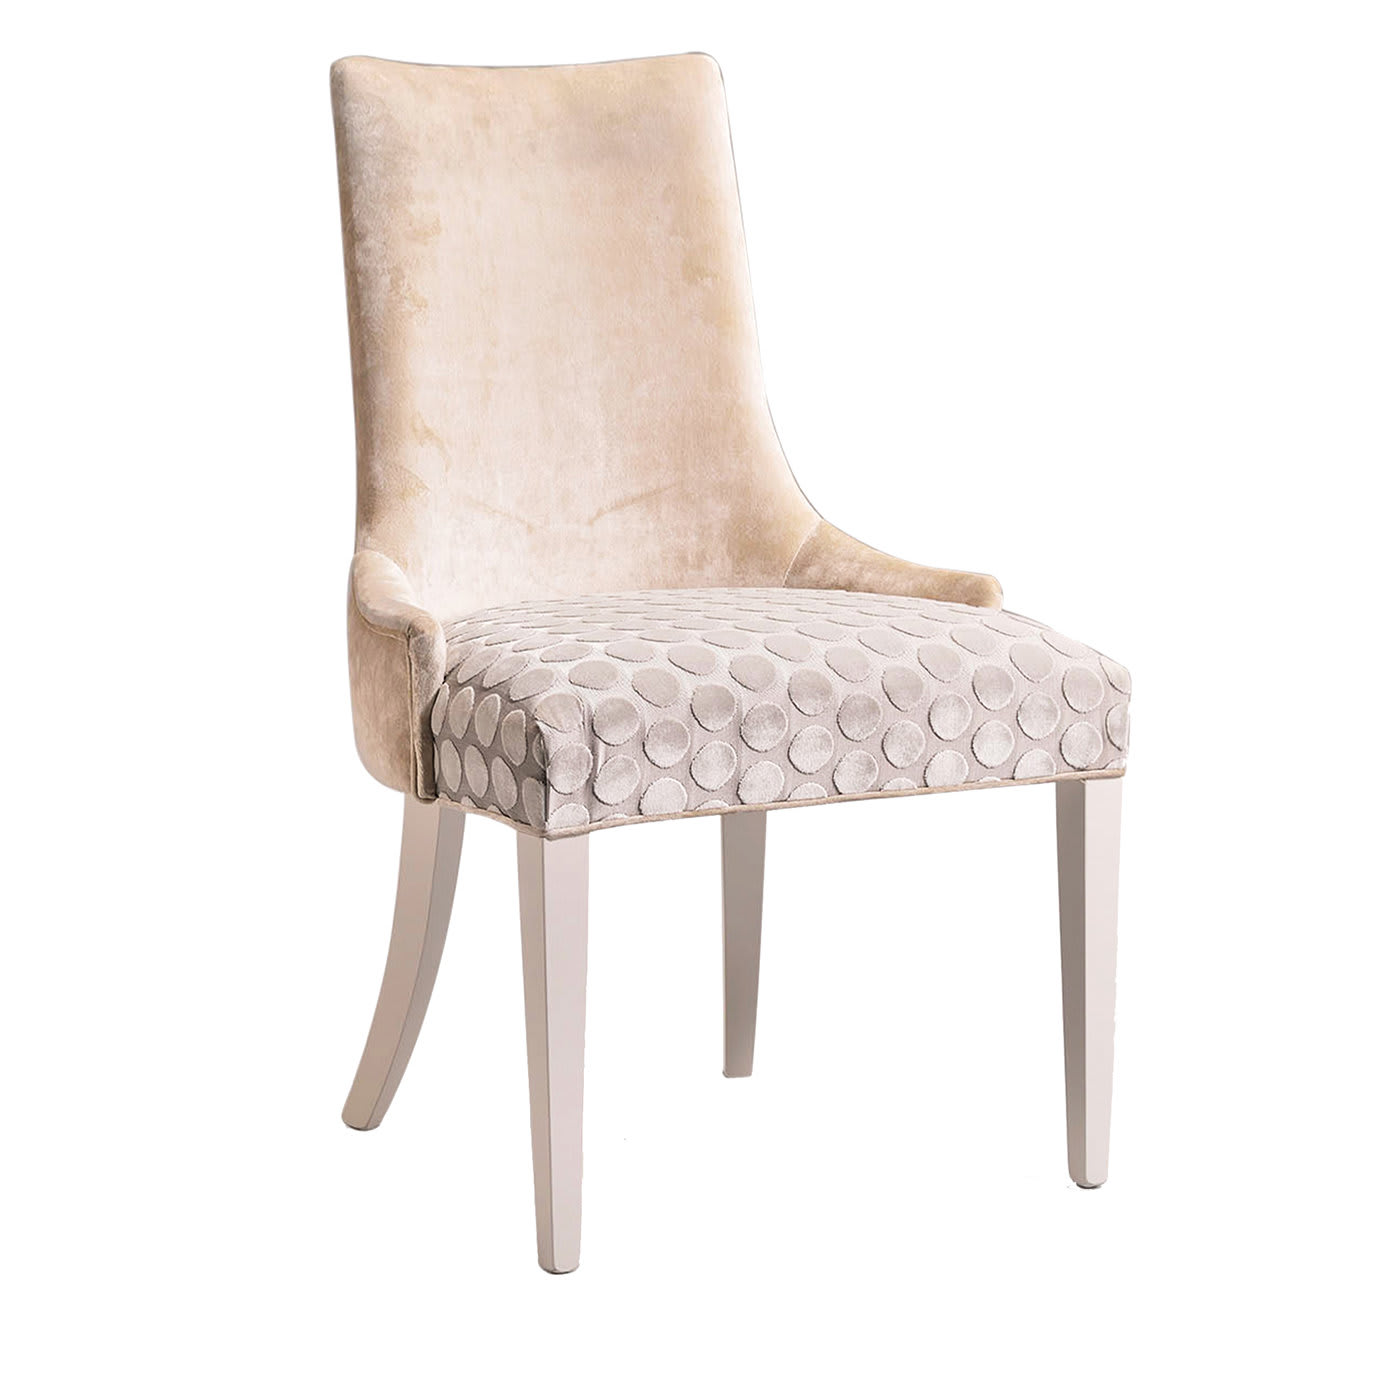 Set of 2 Beige And White Armchairs - Palmobili